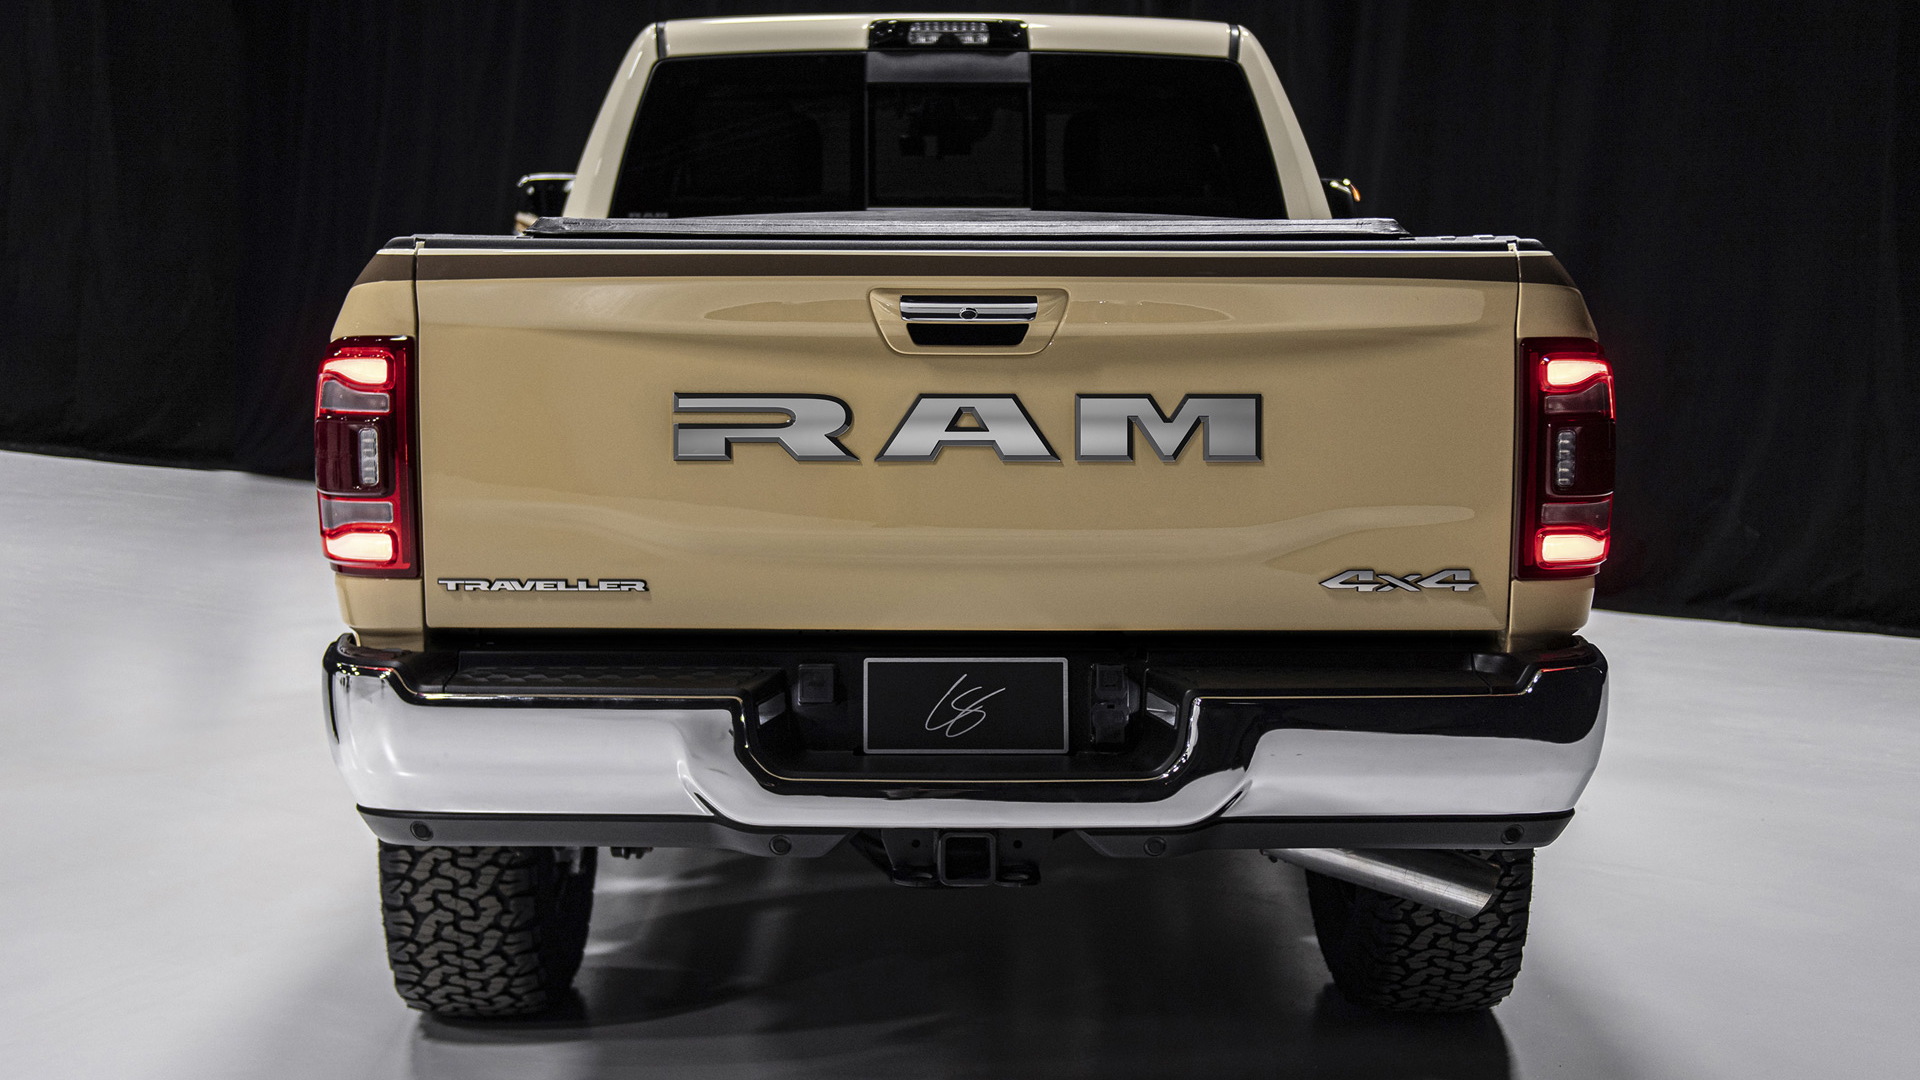 One-off Ram 2500 HD "Traveller" created with Chris Stapleton